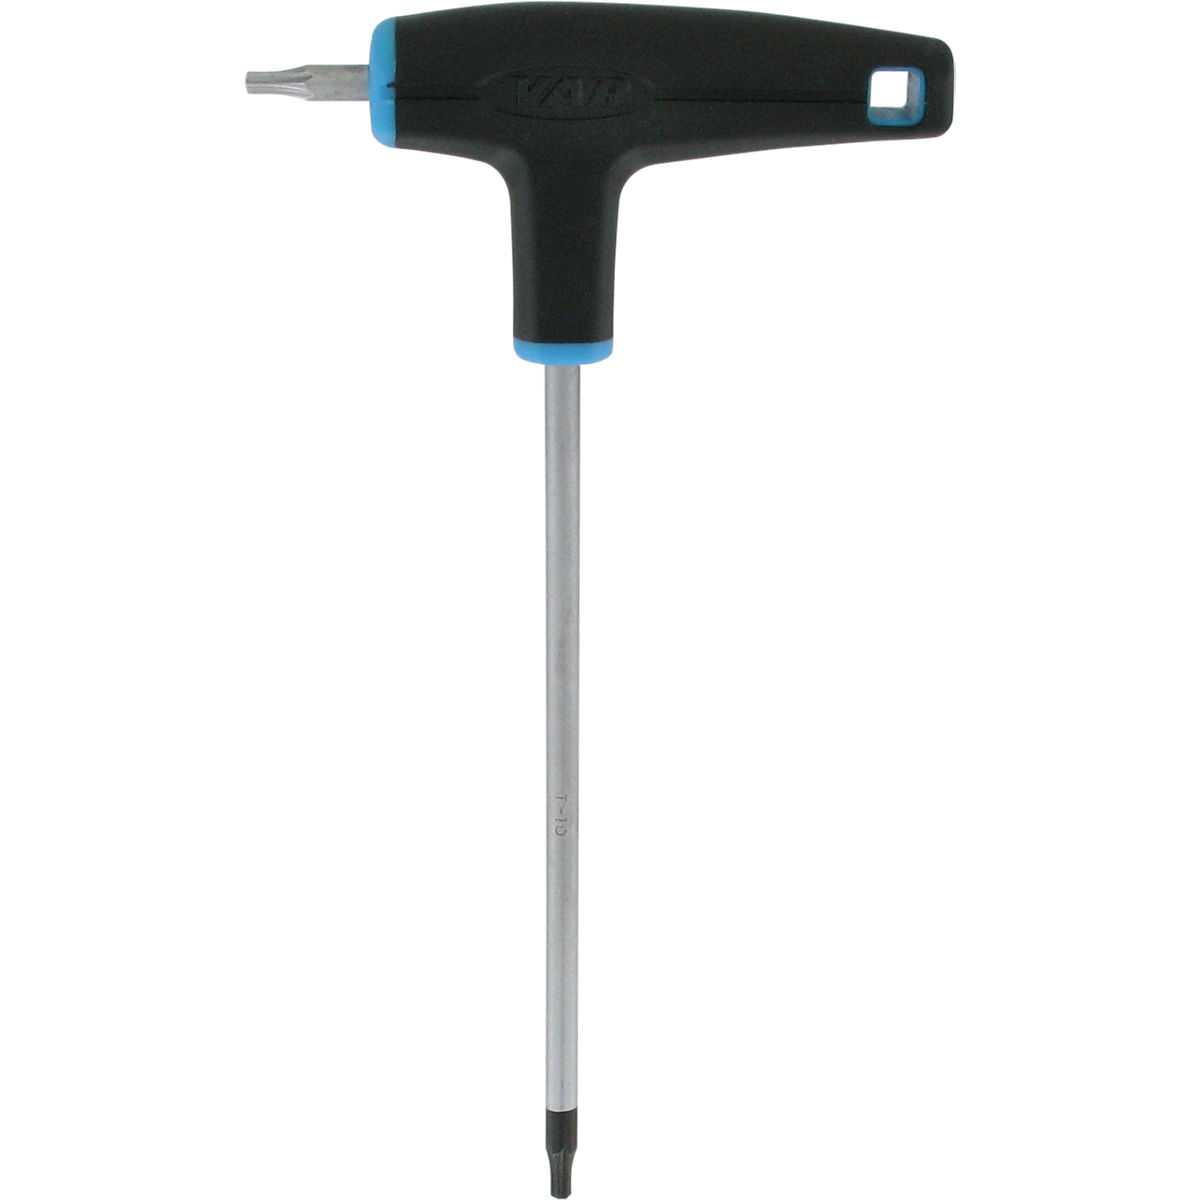 T10 P-handled Torx wrench